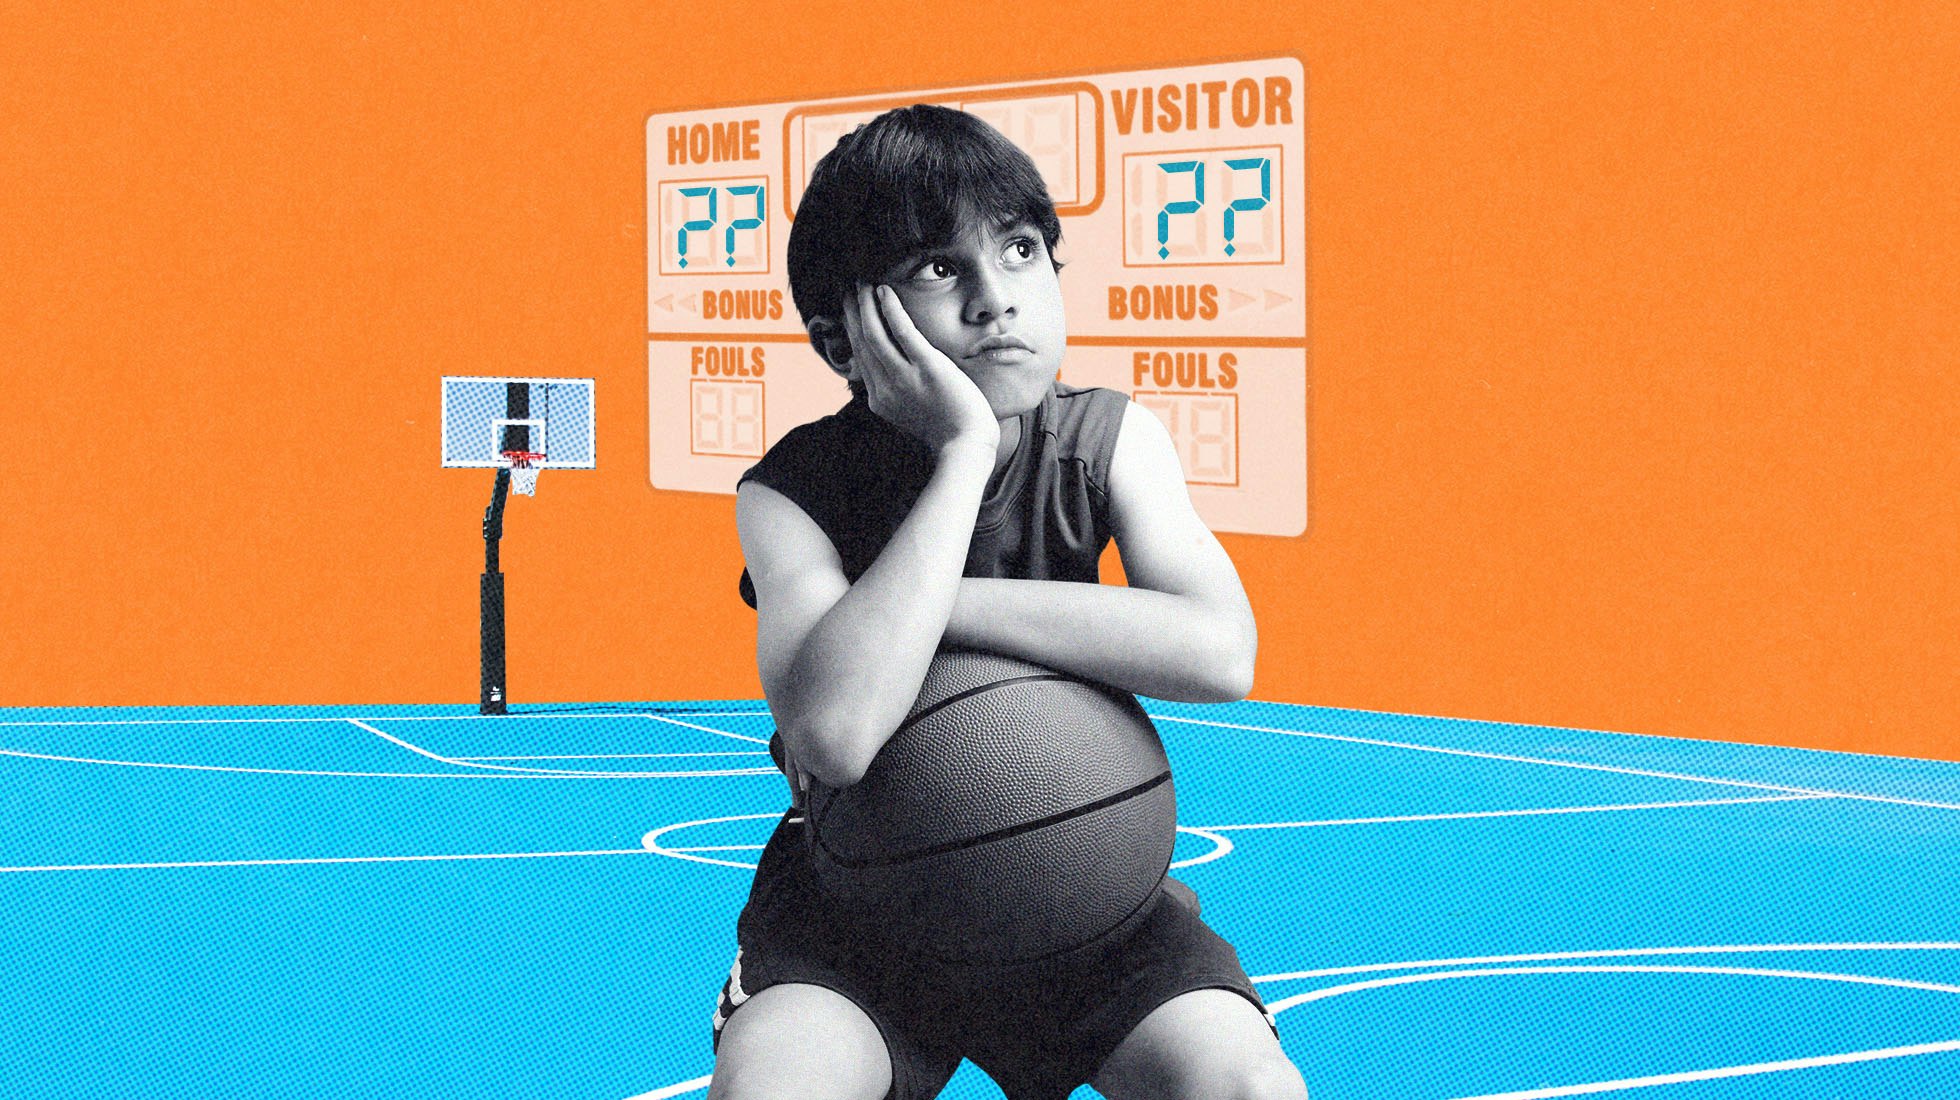 can-we-please-stop-worrying-about-winning-in-youth-sports?